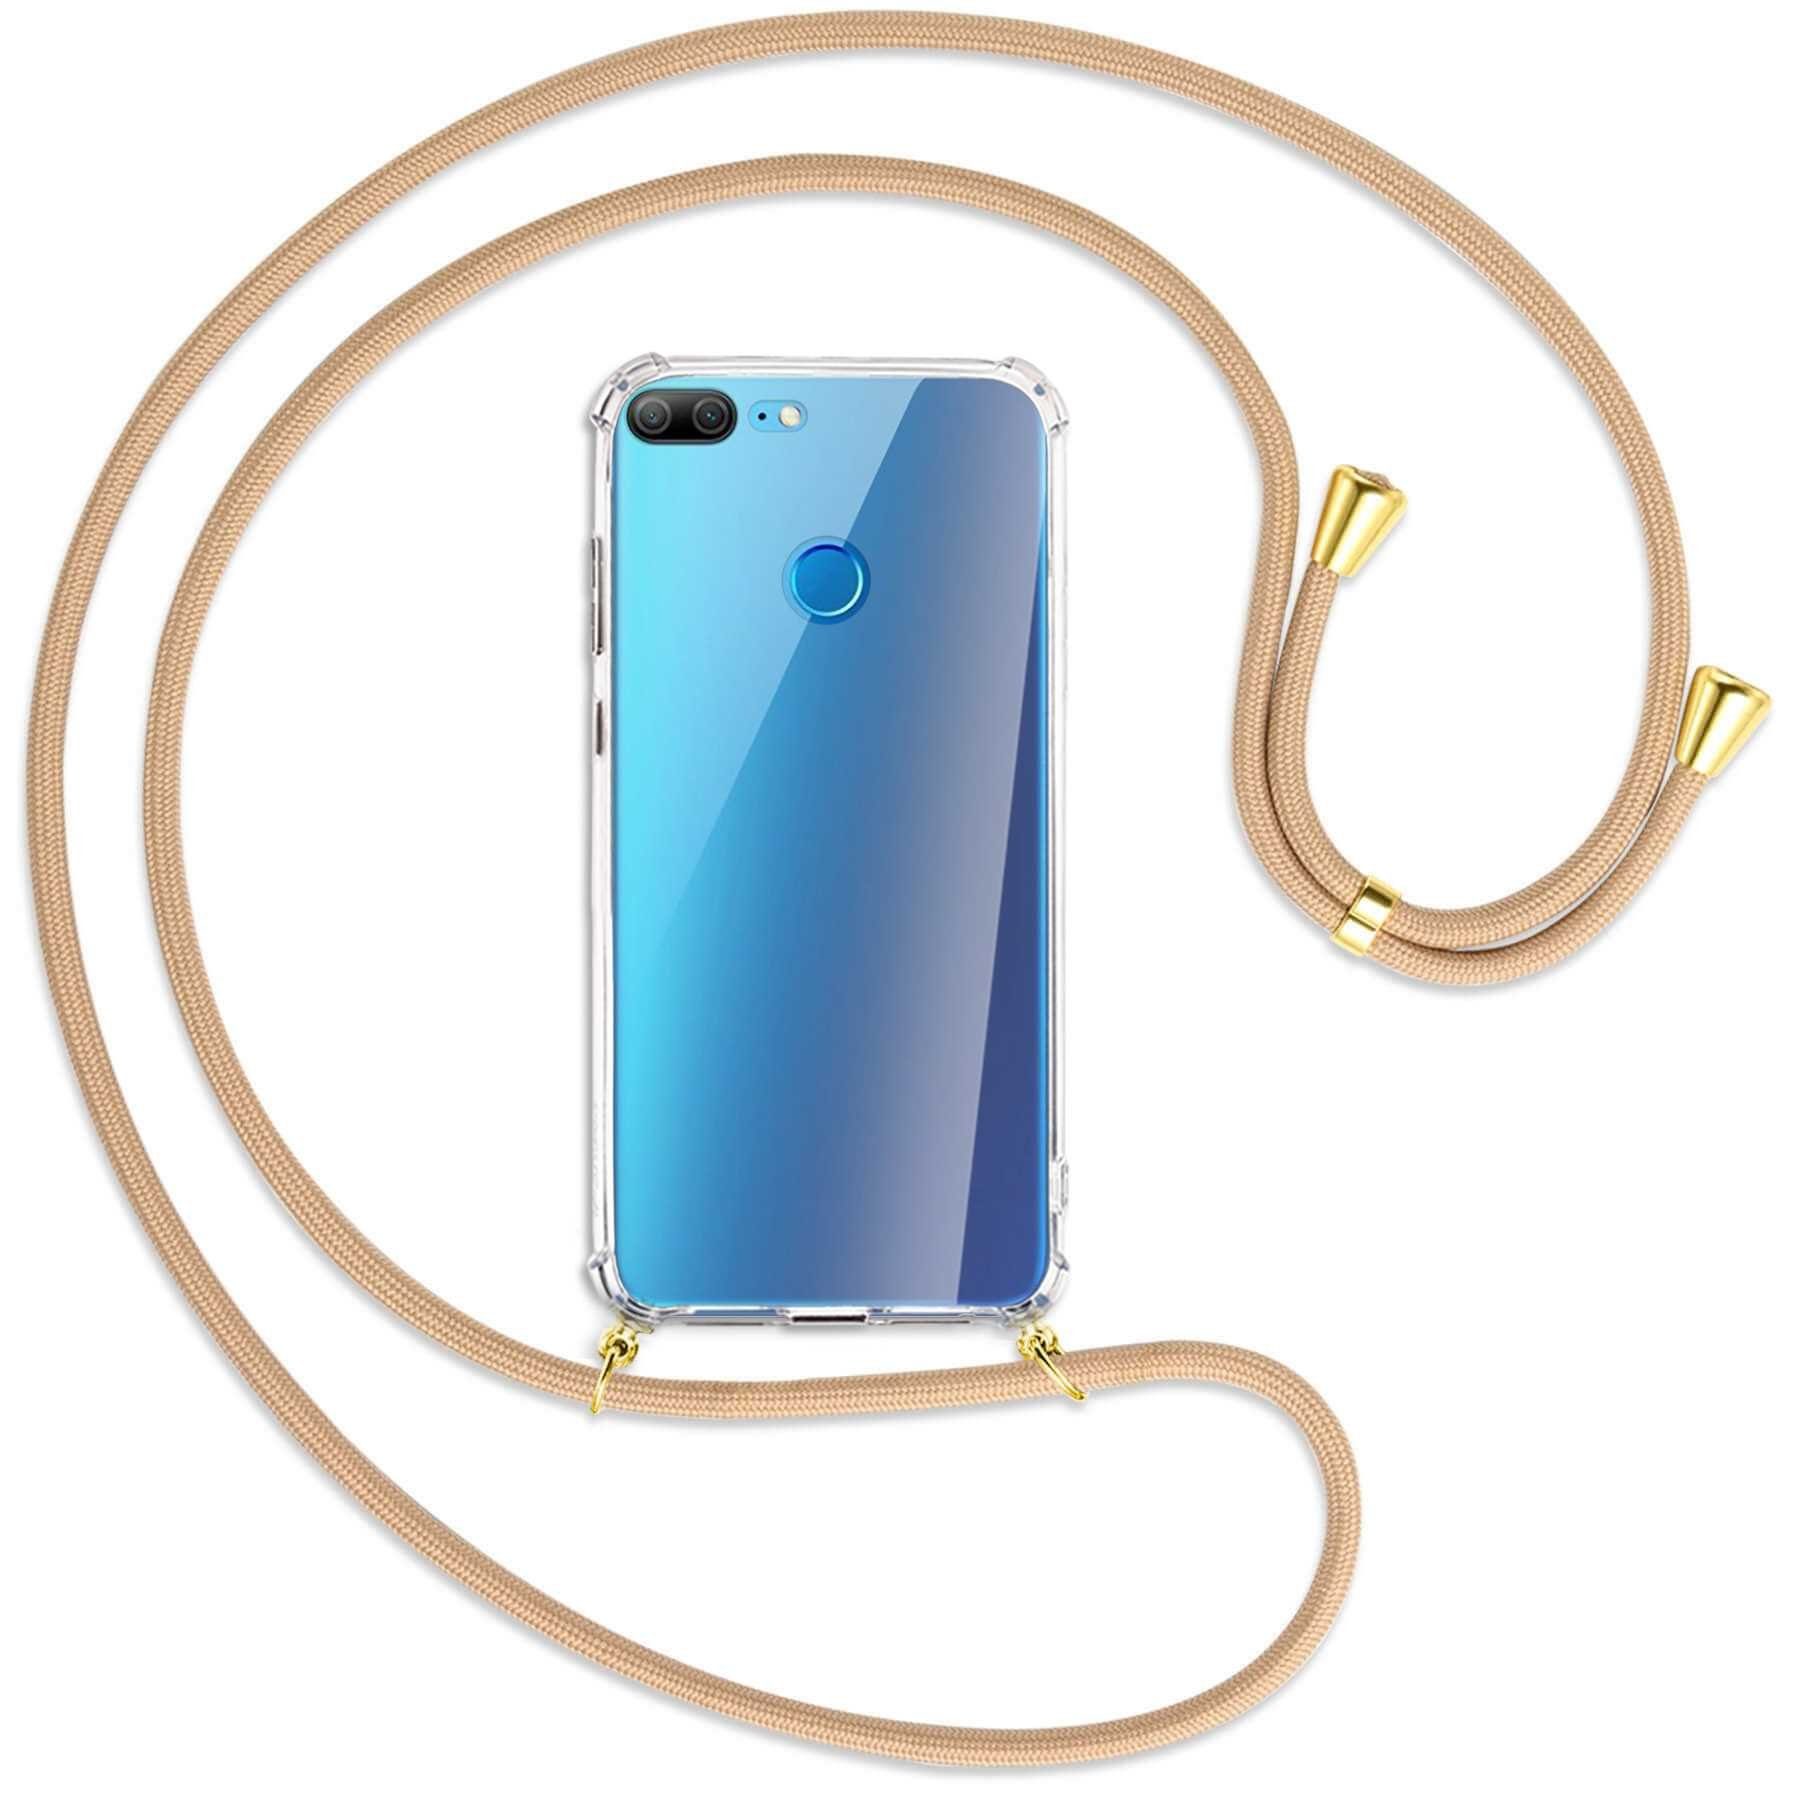 mtb more energy Handykette für Honor 9 Lite, Honor 9 Youth Edition (5.65)  [G], Umhängehülle mit Band [NC-079-G]